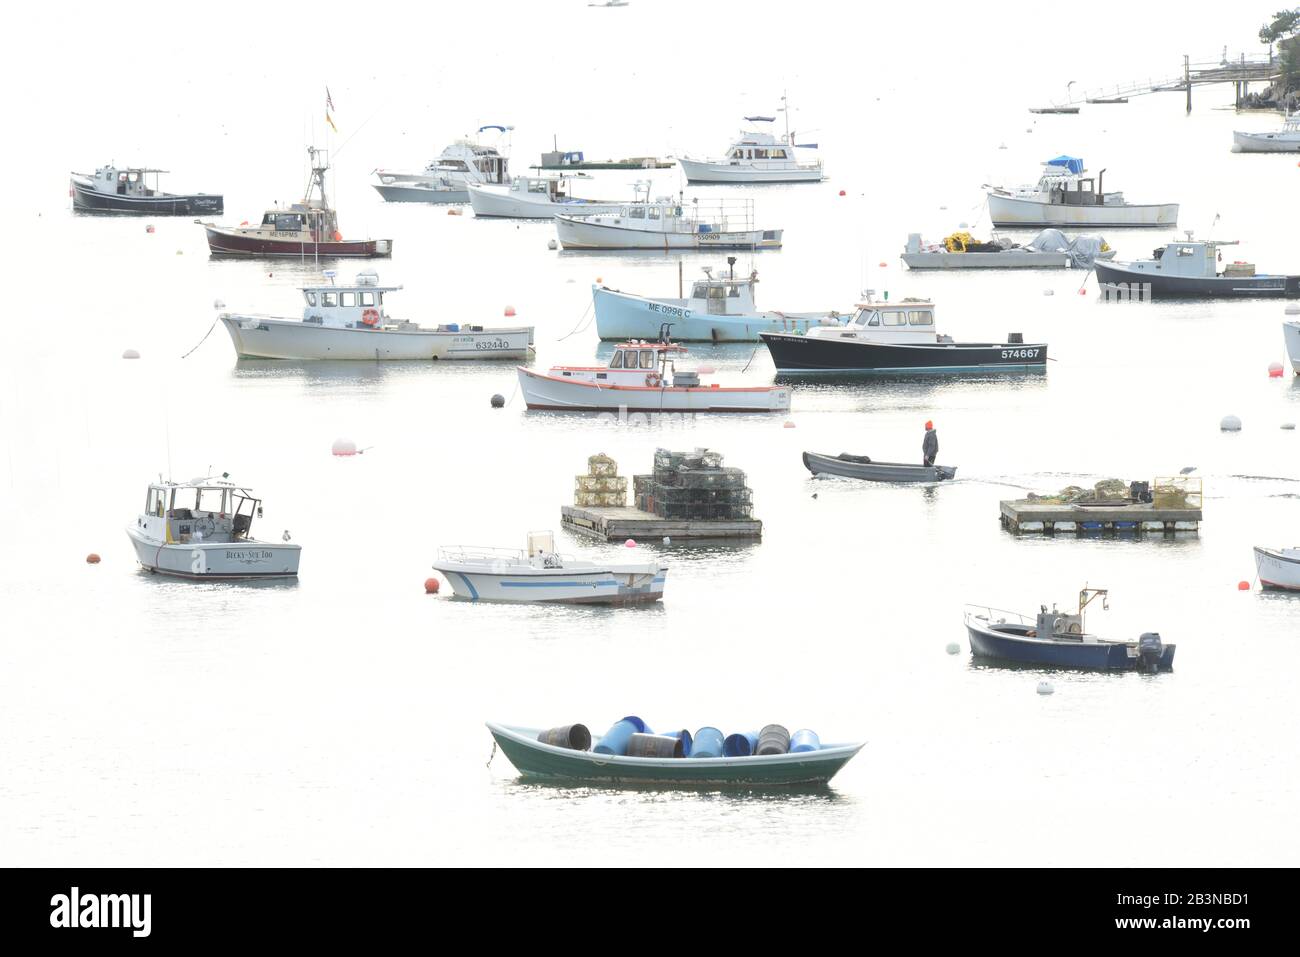 Fishing Fleet anchored in cove, Maine, New England, United States of America, North America Stock Photo